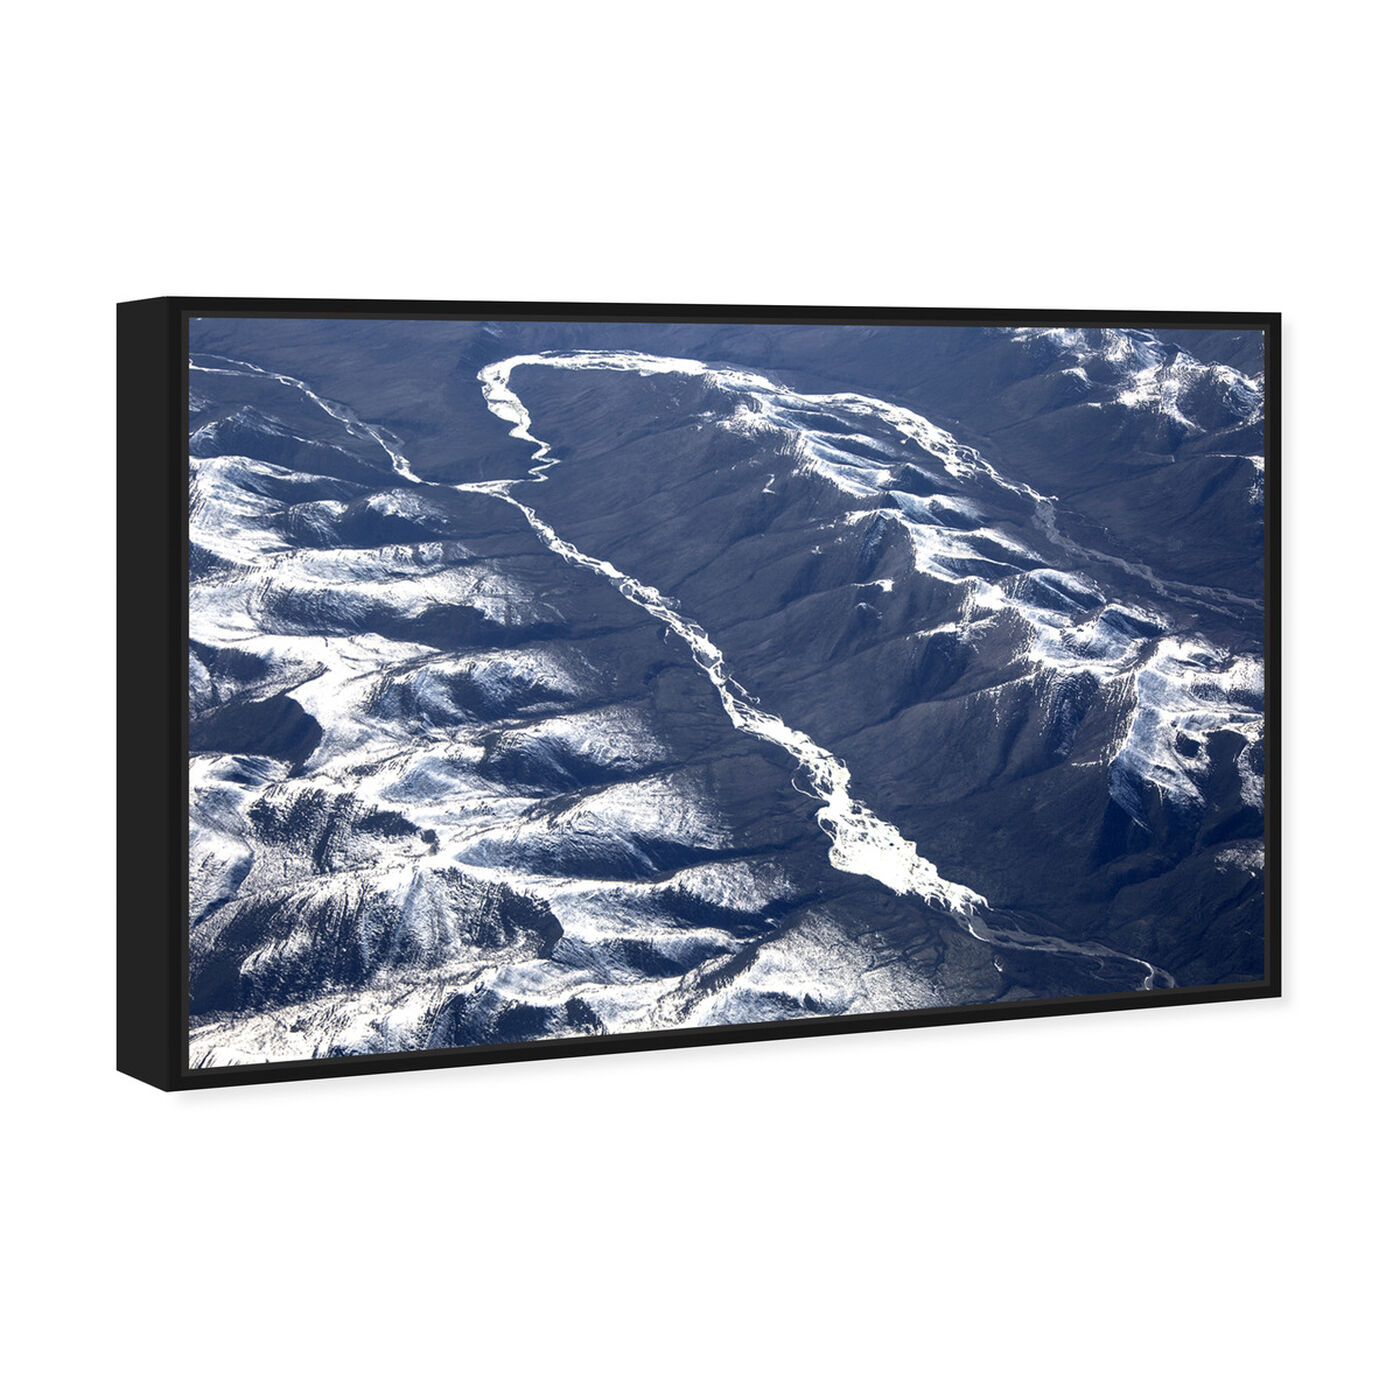 Angled view of Curro Cardenal - Aero View I featuring nature and landscape and mountains art.